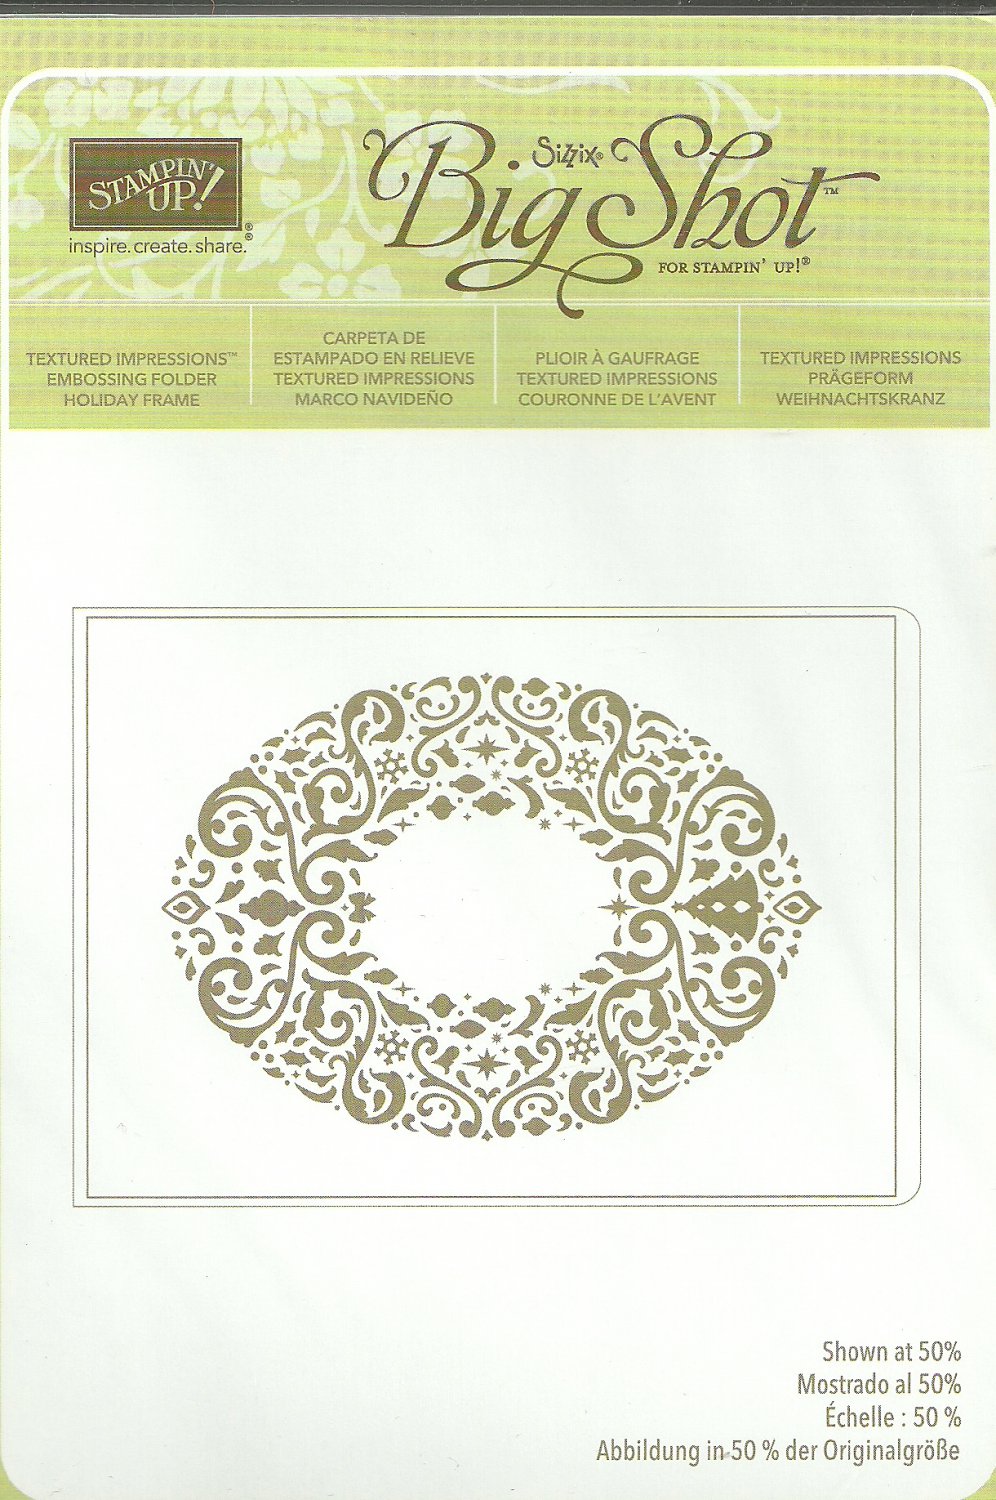 HOLIDAY FRAME - EMBOSSING FOLDER - SIZZIX BIG SHOT for STAMPIN' UP! - NEW